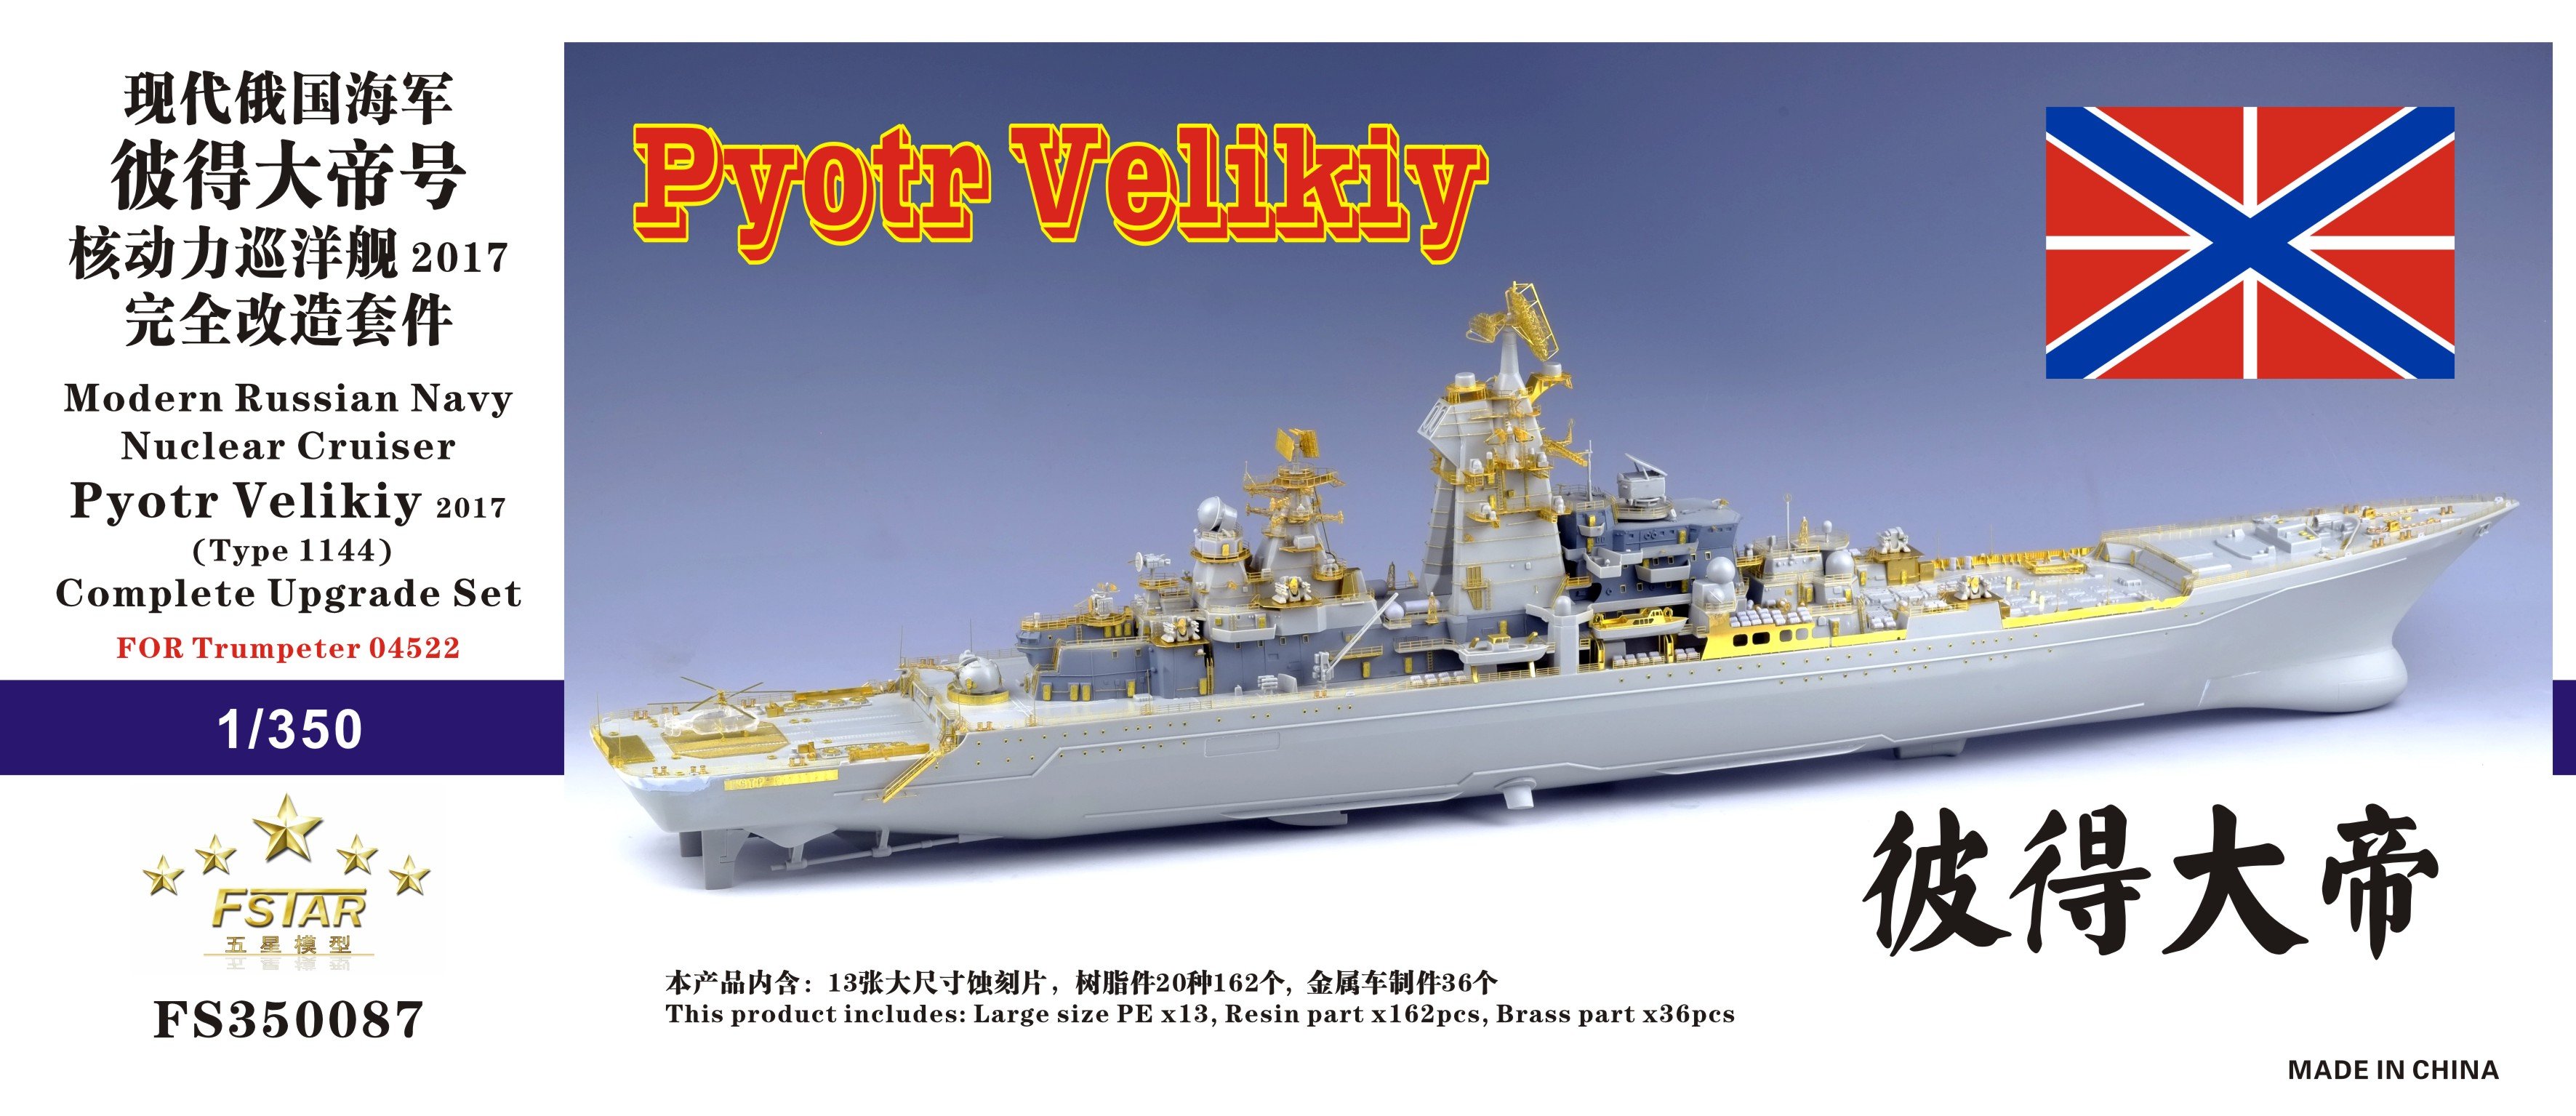 1/350 Russian Pyotr Velikiy 2017 Upgrade Set for Trumpeter 04522 - Click Image to Close